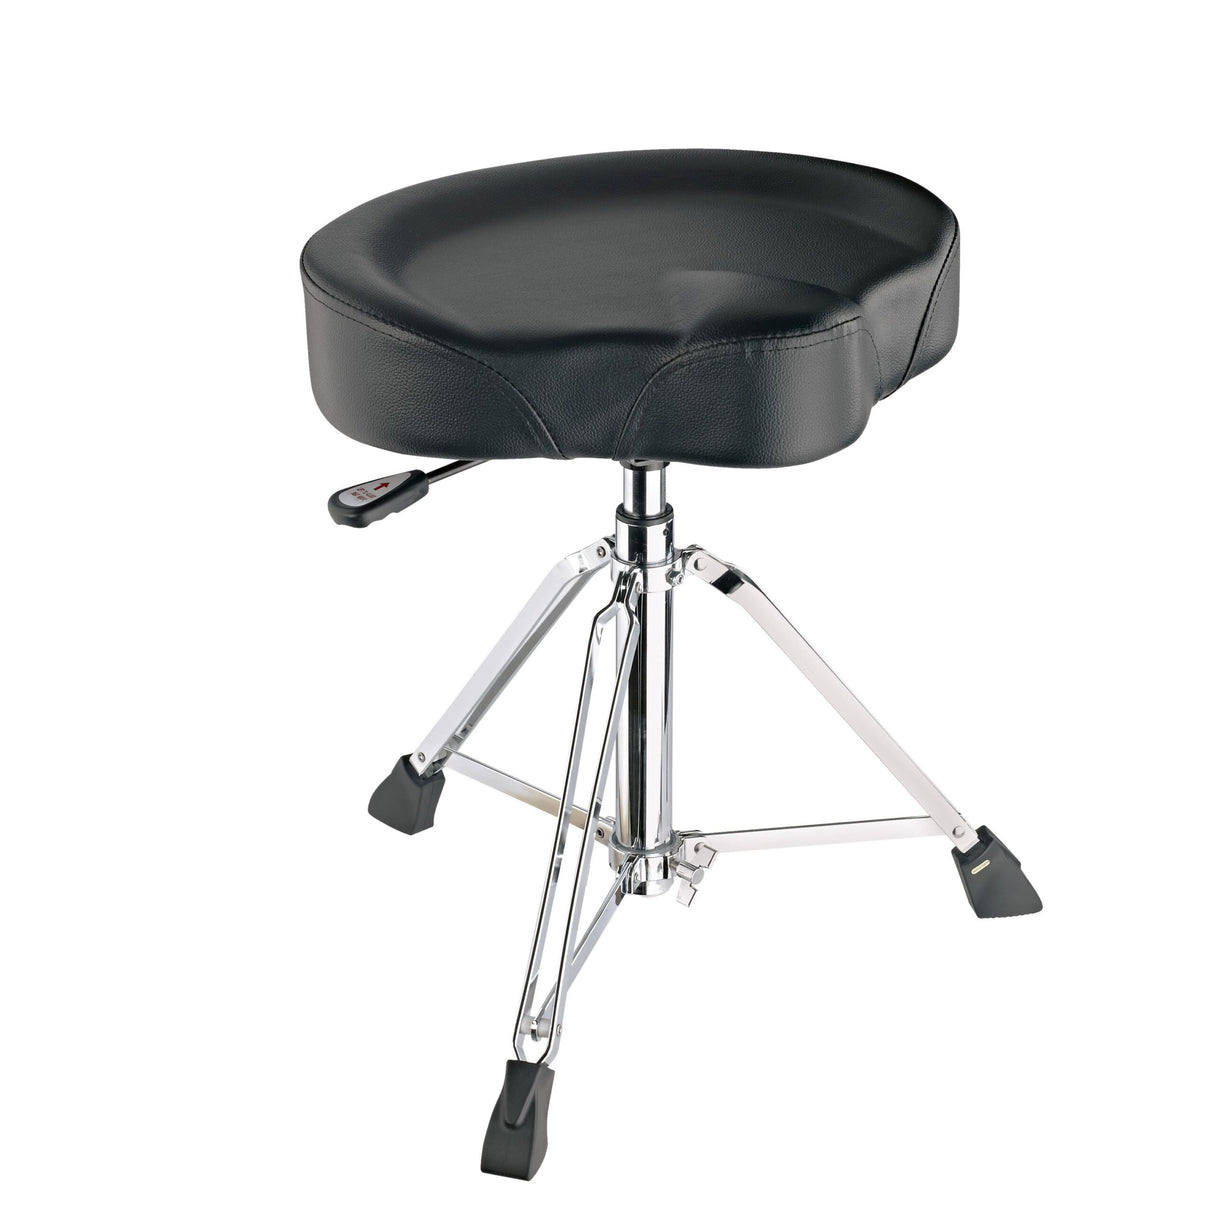 K&M 14035 Drummers Throne Chair with Pneumatic Spring, Black